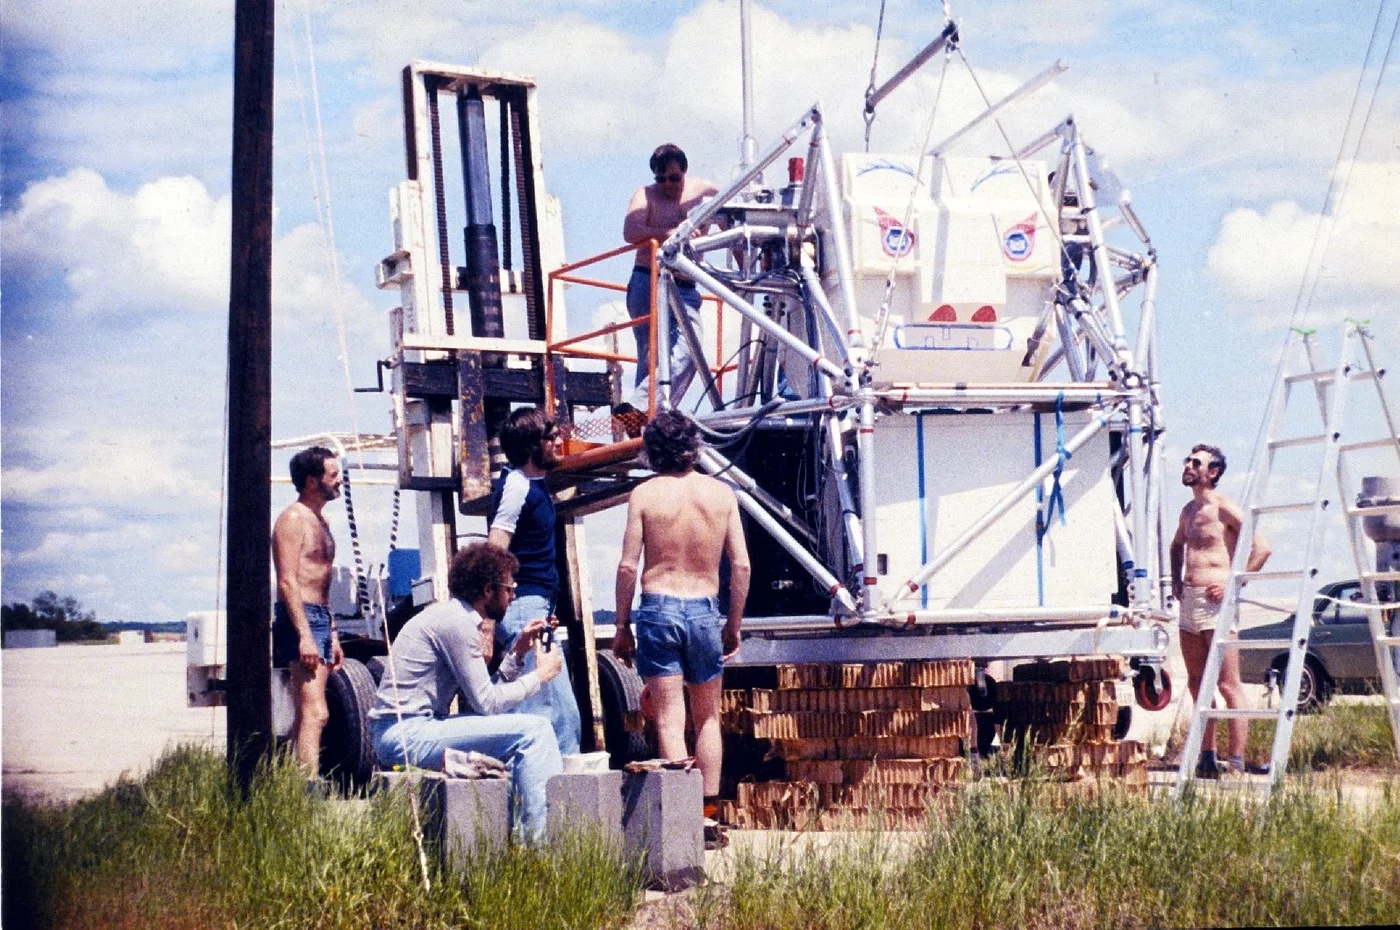 The HEXE instrument during preparations at Palestine base in Texas. (Image: � H. Steinle, MPE)